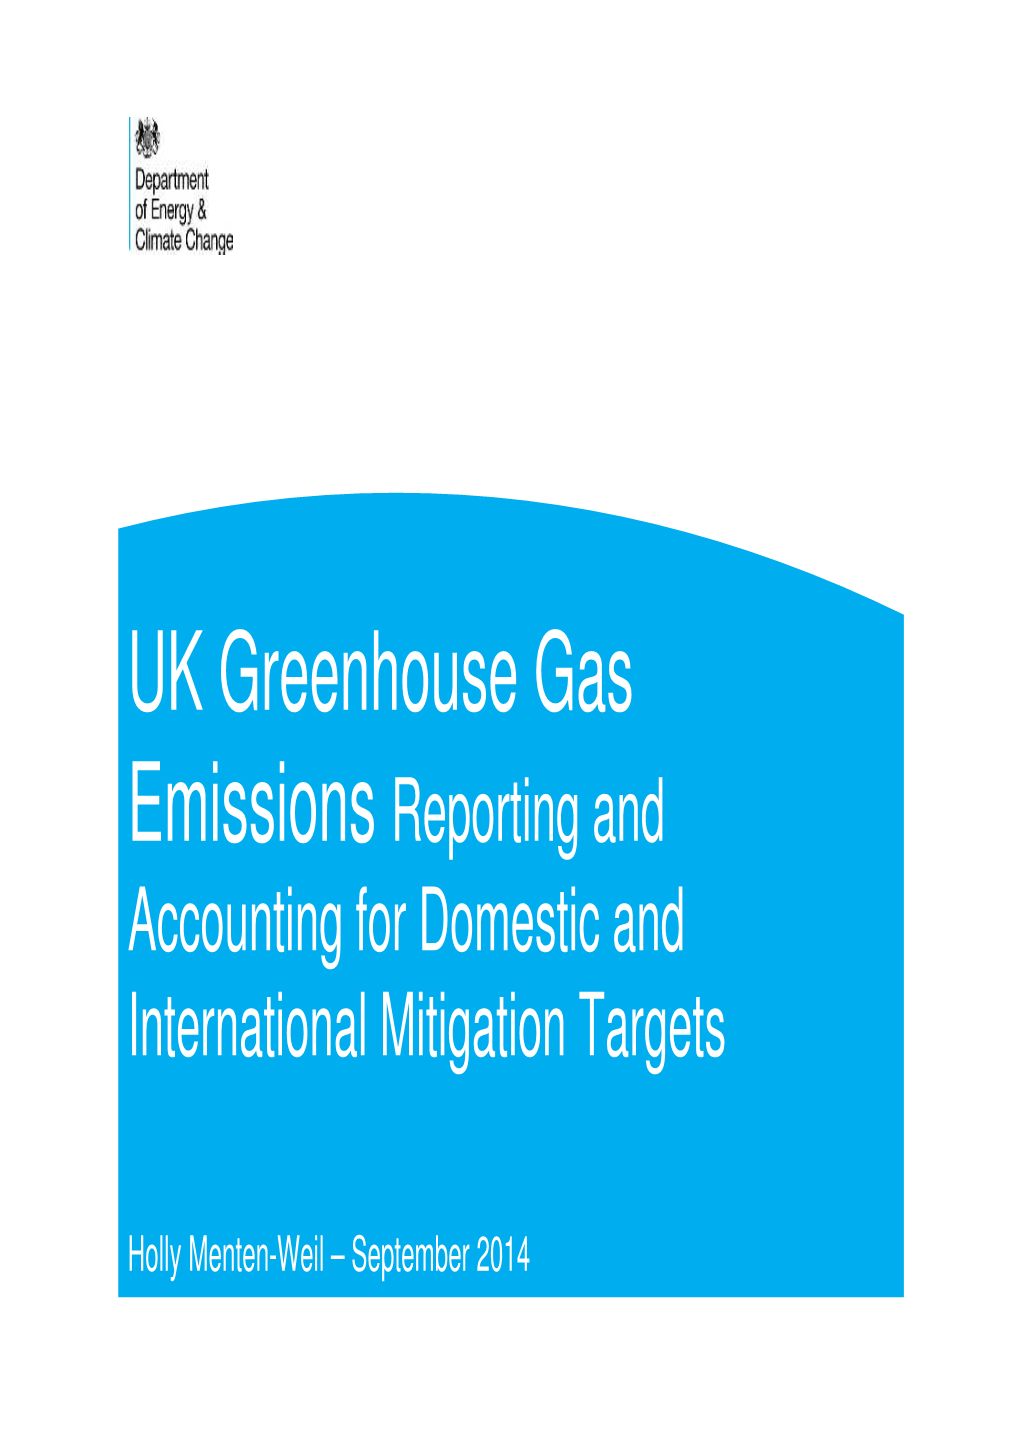 UK Greenhouse Gas Emissions Reporting and Accounting for Domestic and International Mitigation Targets